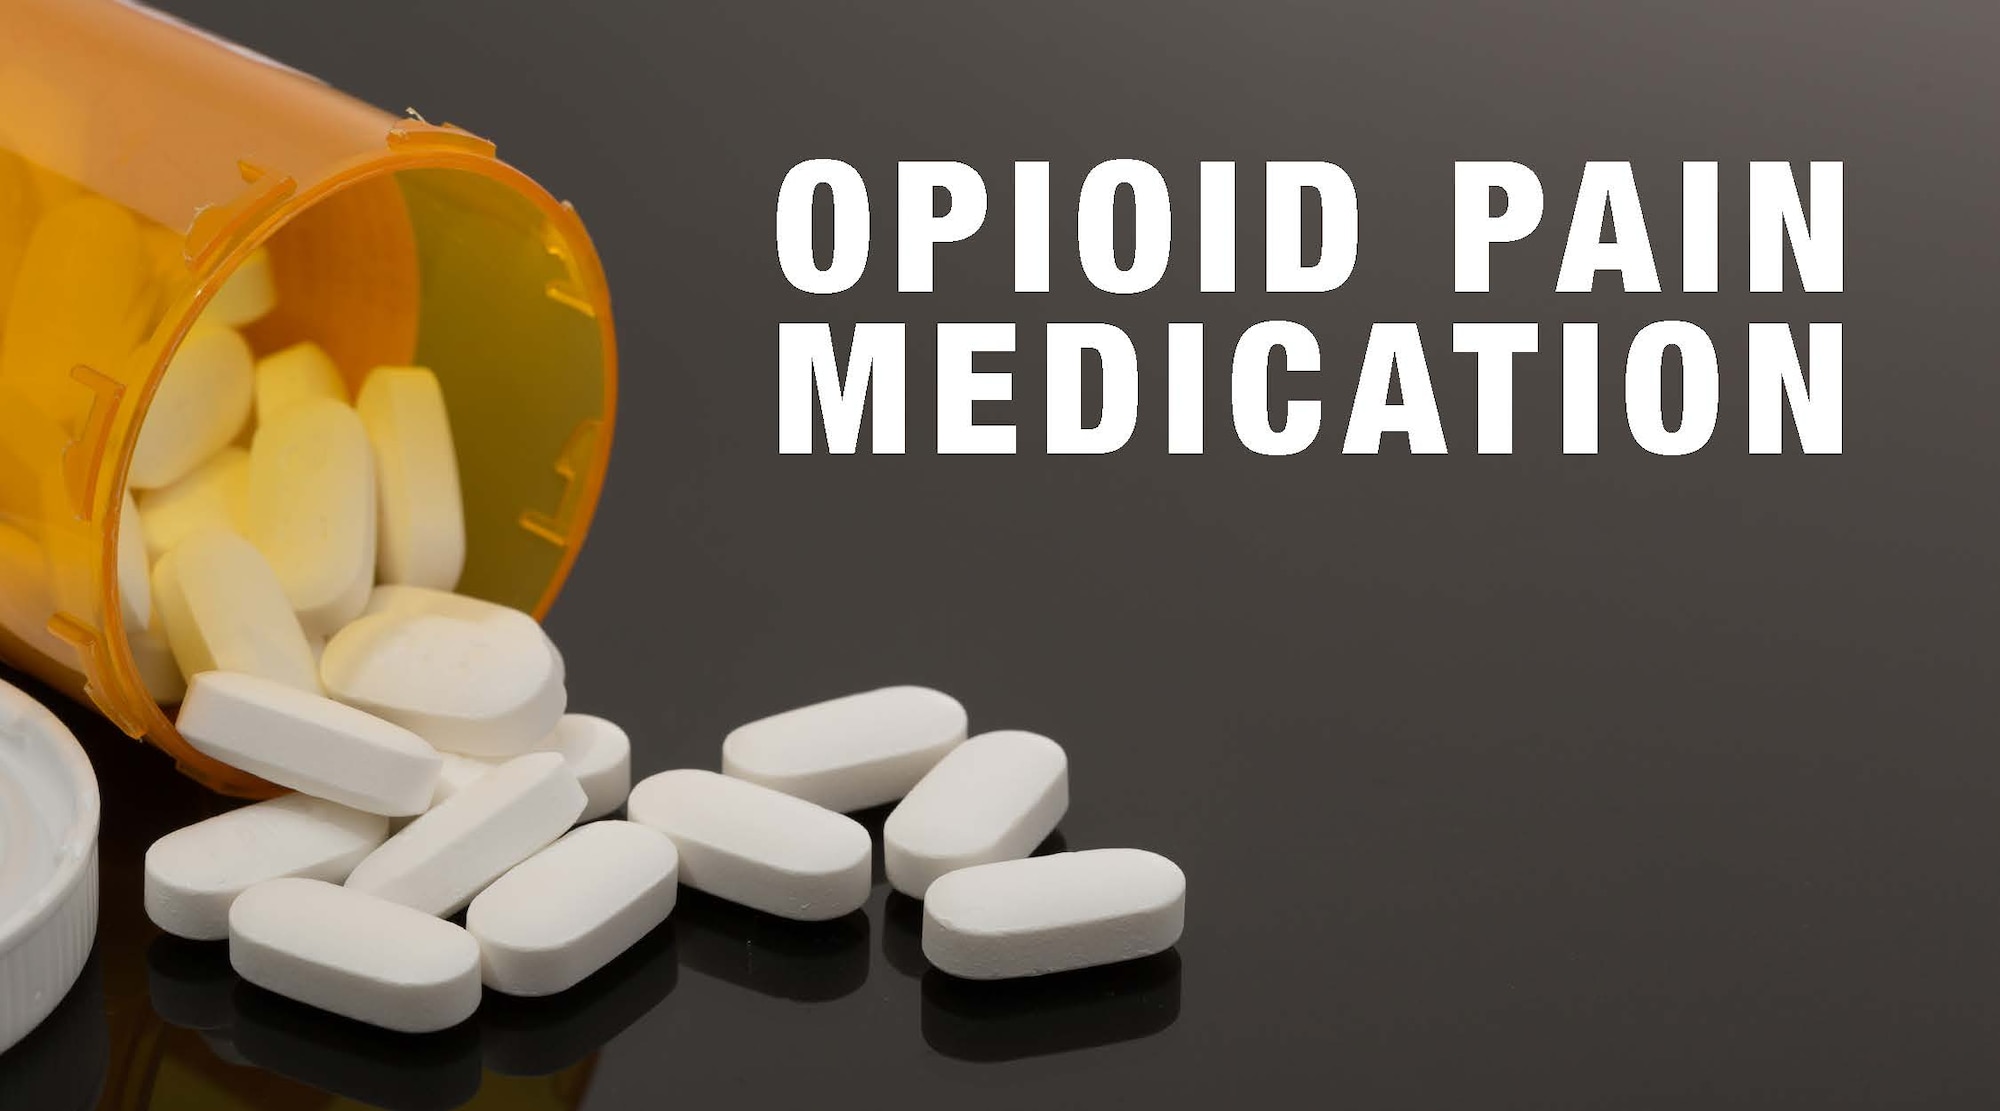 Pain medications can be dangerous opioids